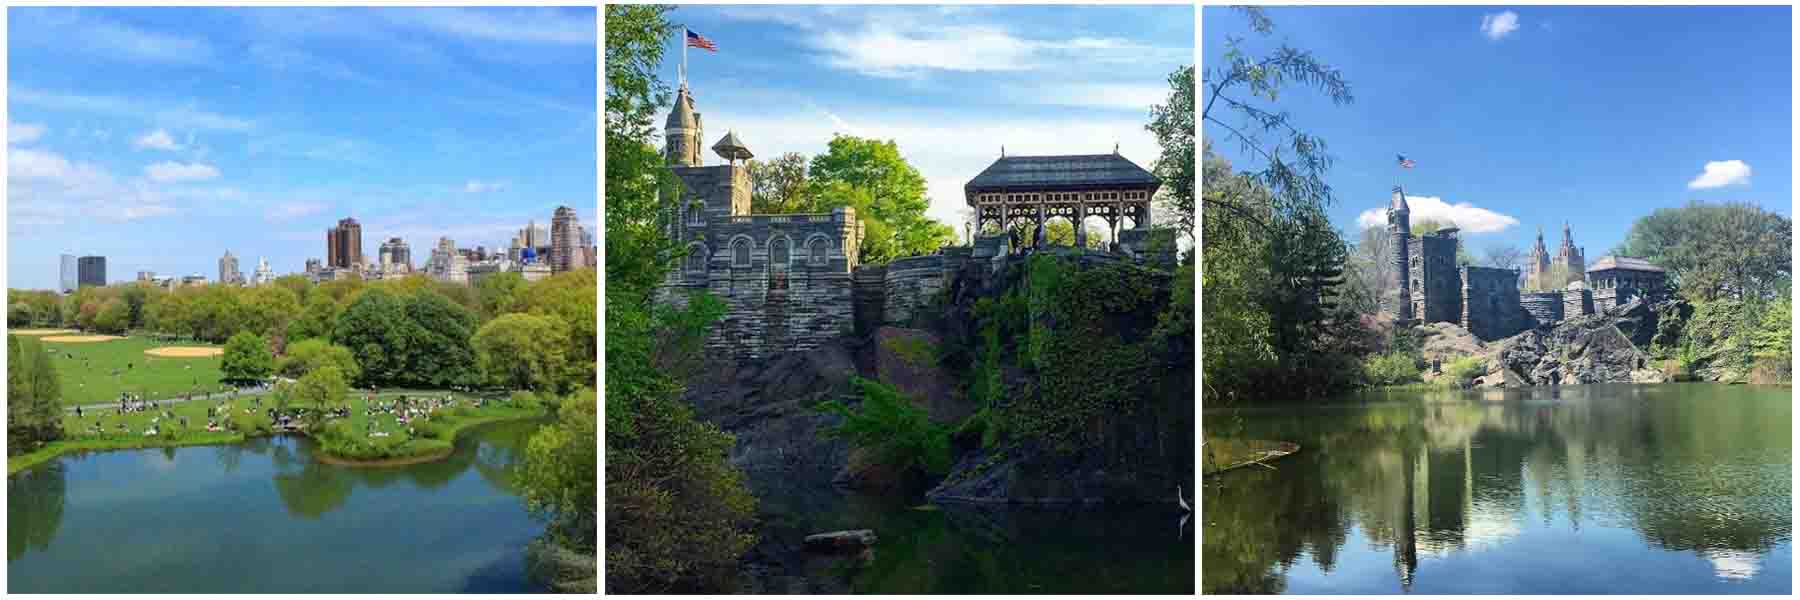 3 panel image of Belvedere Castle from different angles